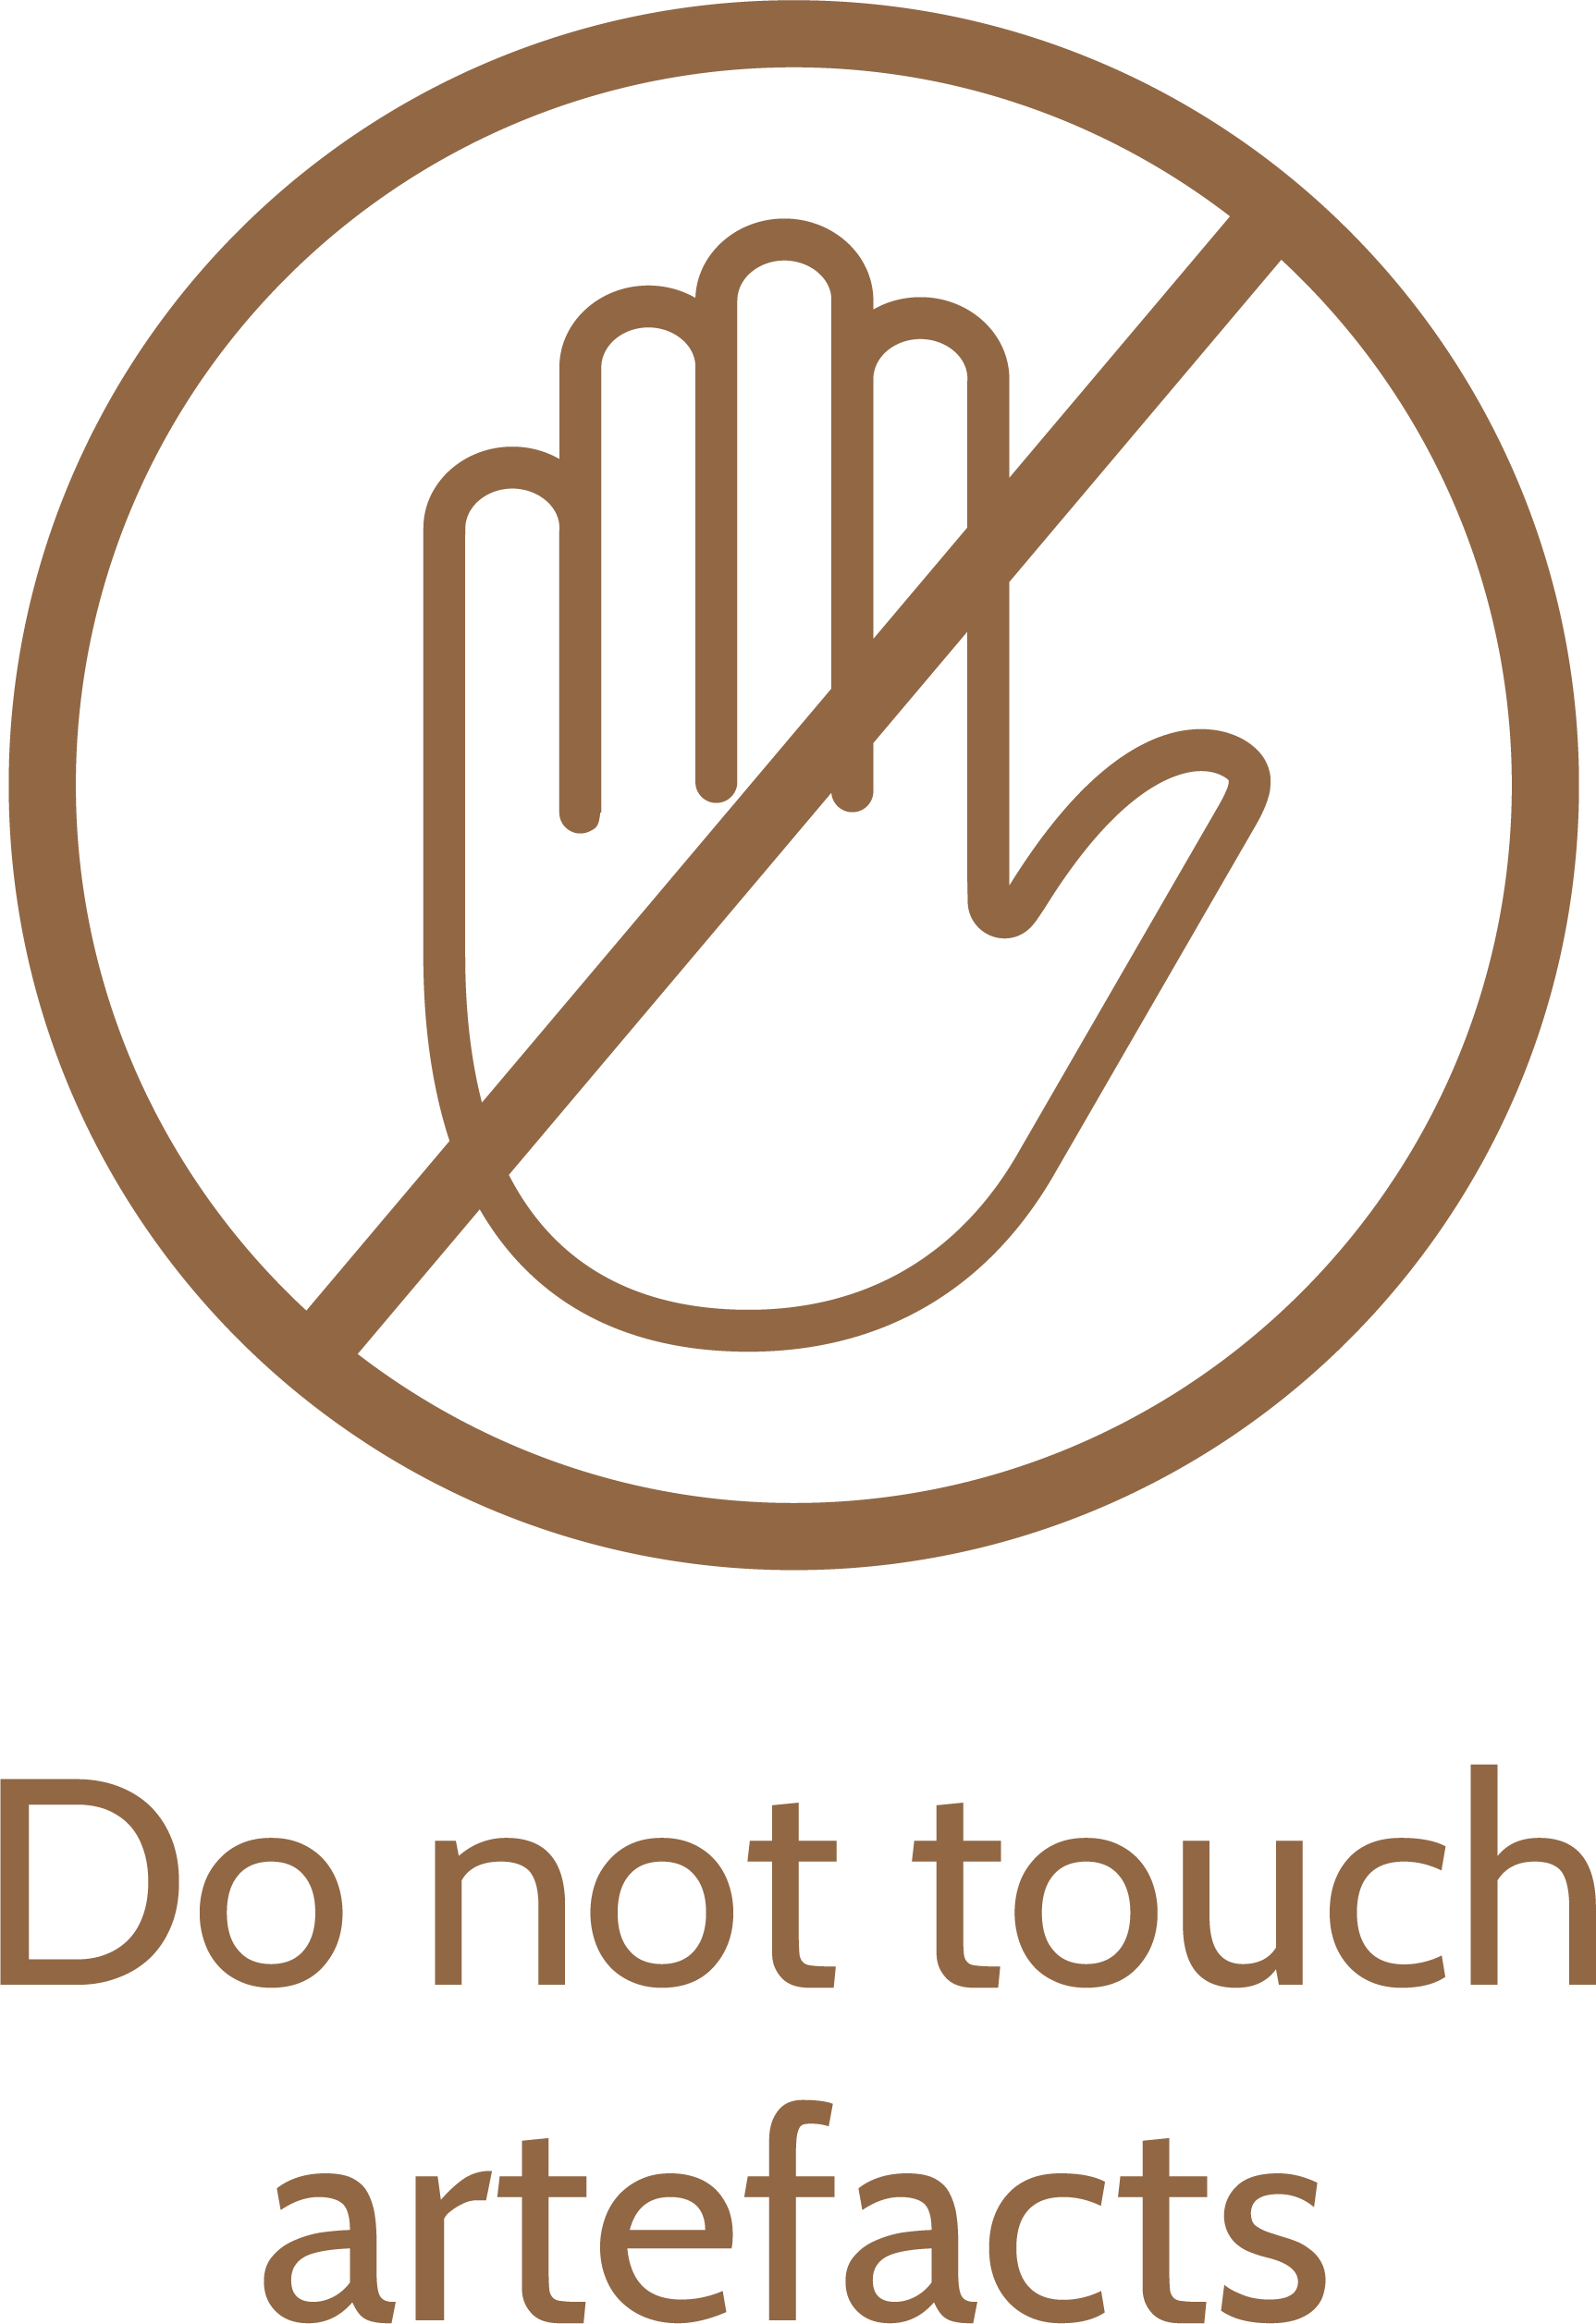 Do not touch artefacts